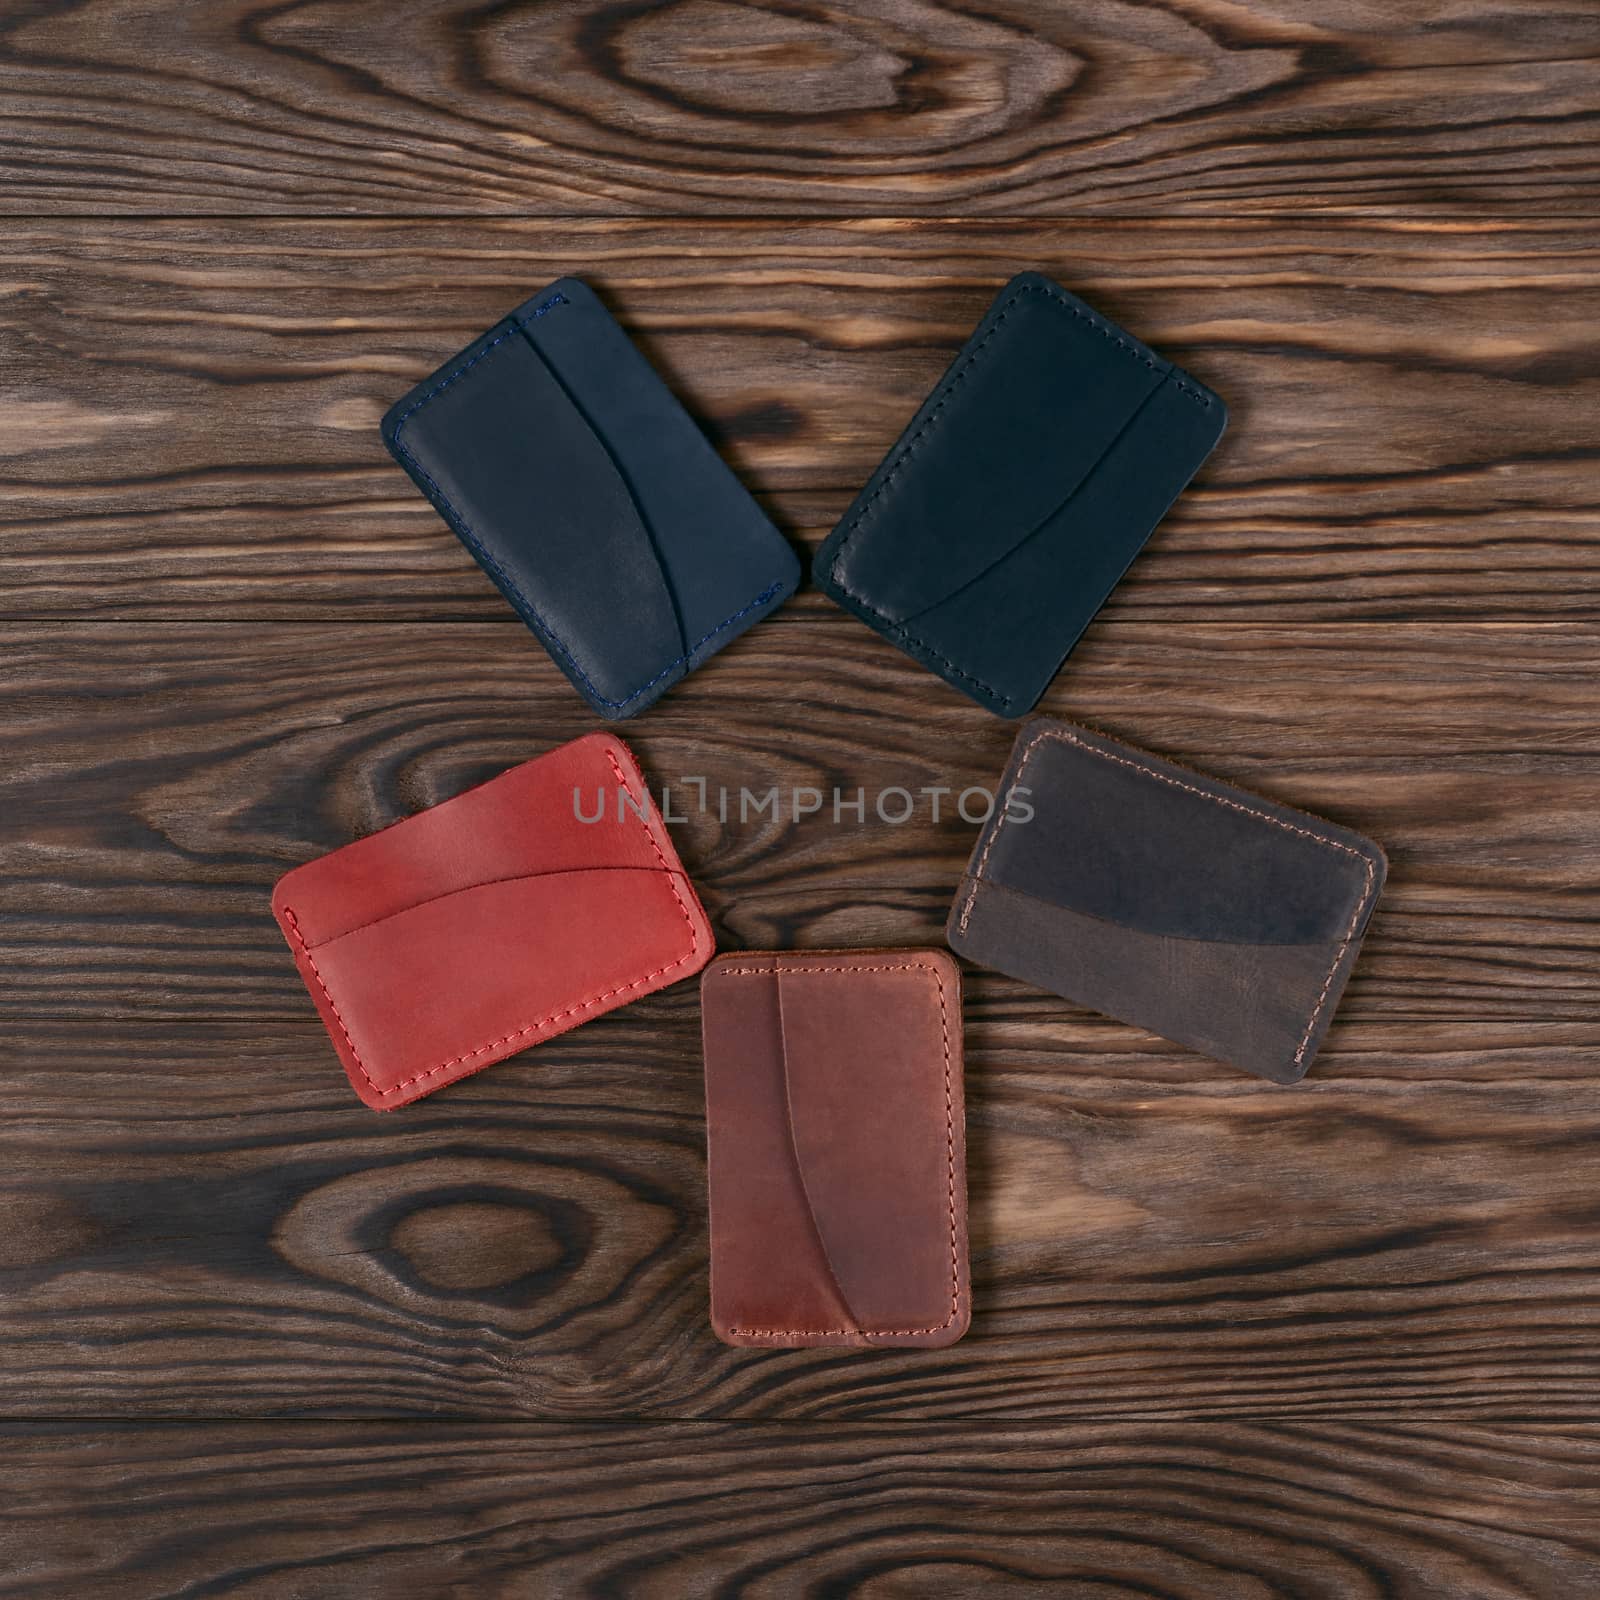 Five handmade leather cardholders on wooden background lie star shaped. Stock photo on perfect wooden background. Blue, black, brown, ginger and red items on photo. by alexsdriver